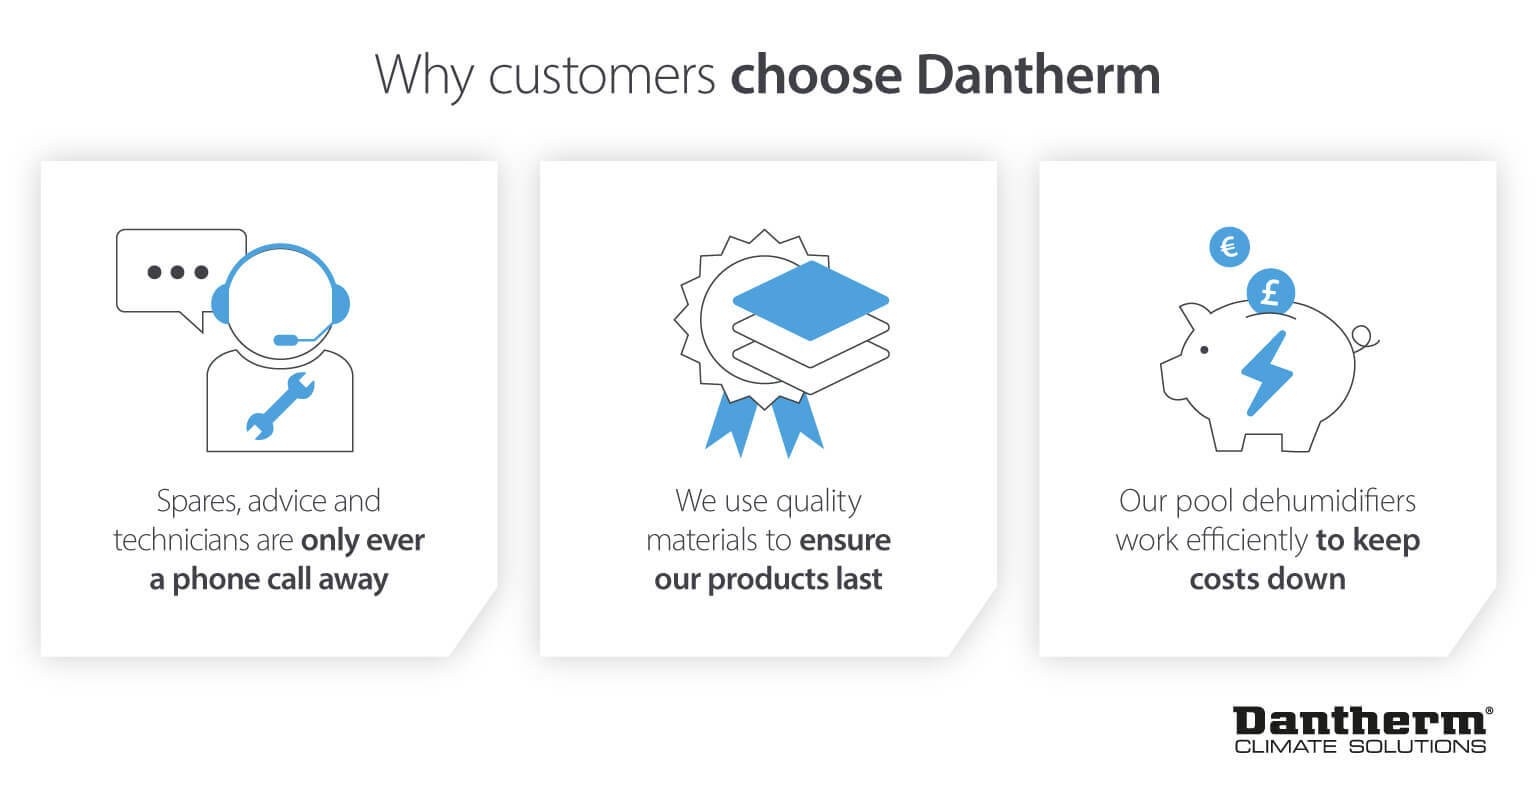 Why customers choose and trust Dantherm for swimming pool dehumidifiers